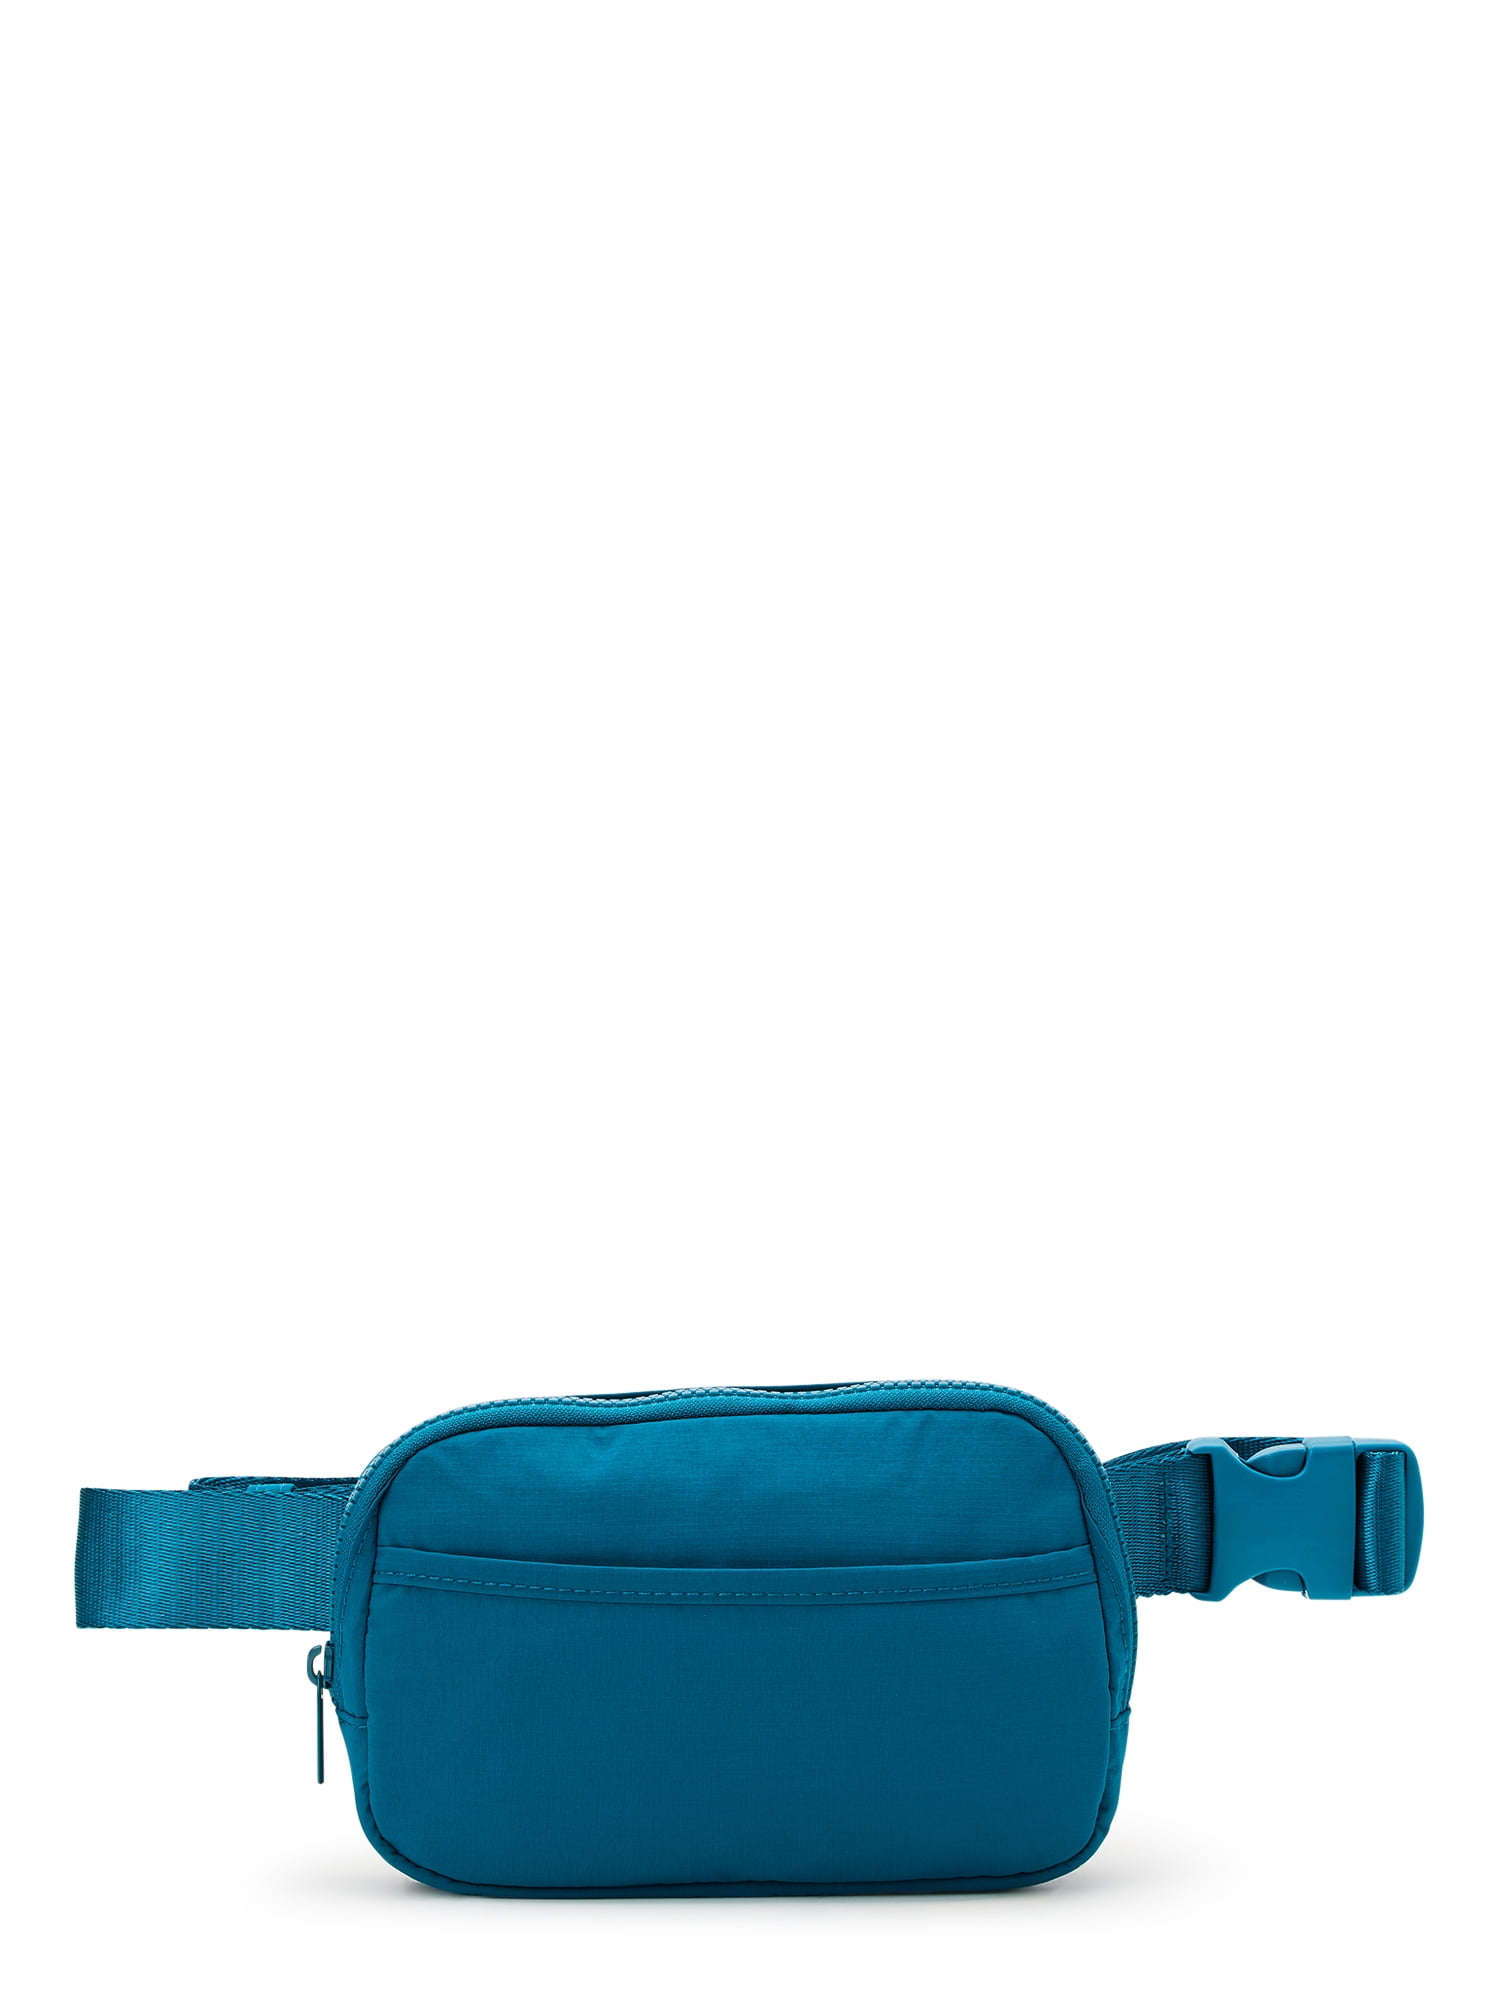 Athletic Works Women's Fanny Pack, Blue 